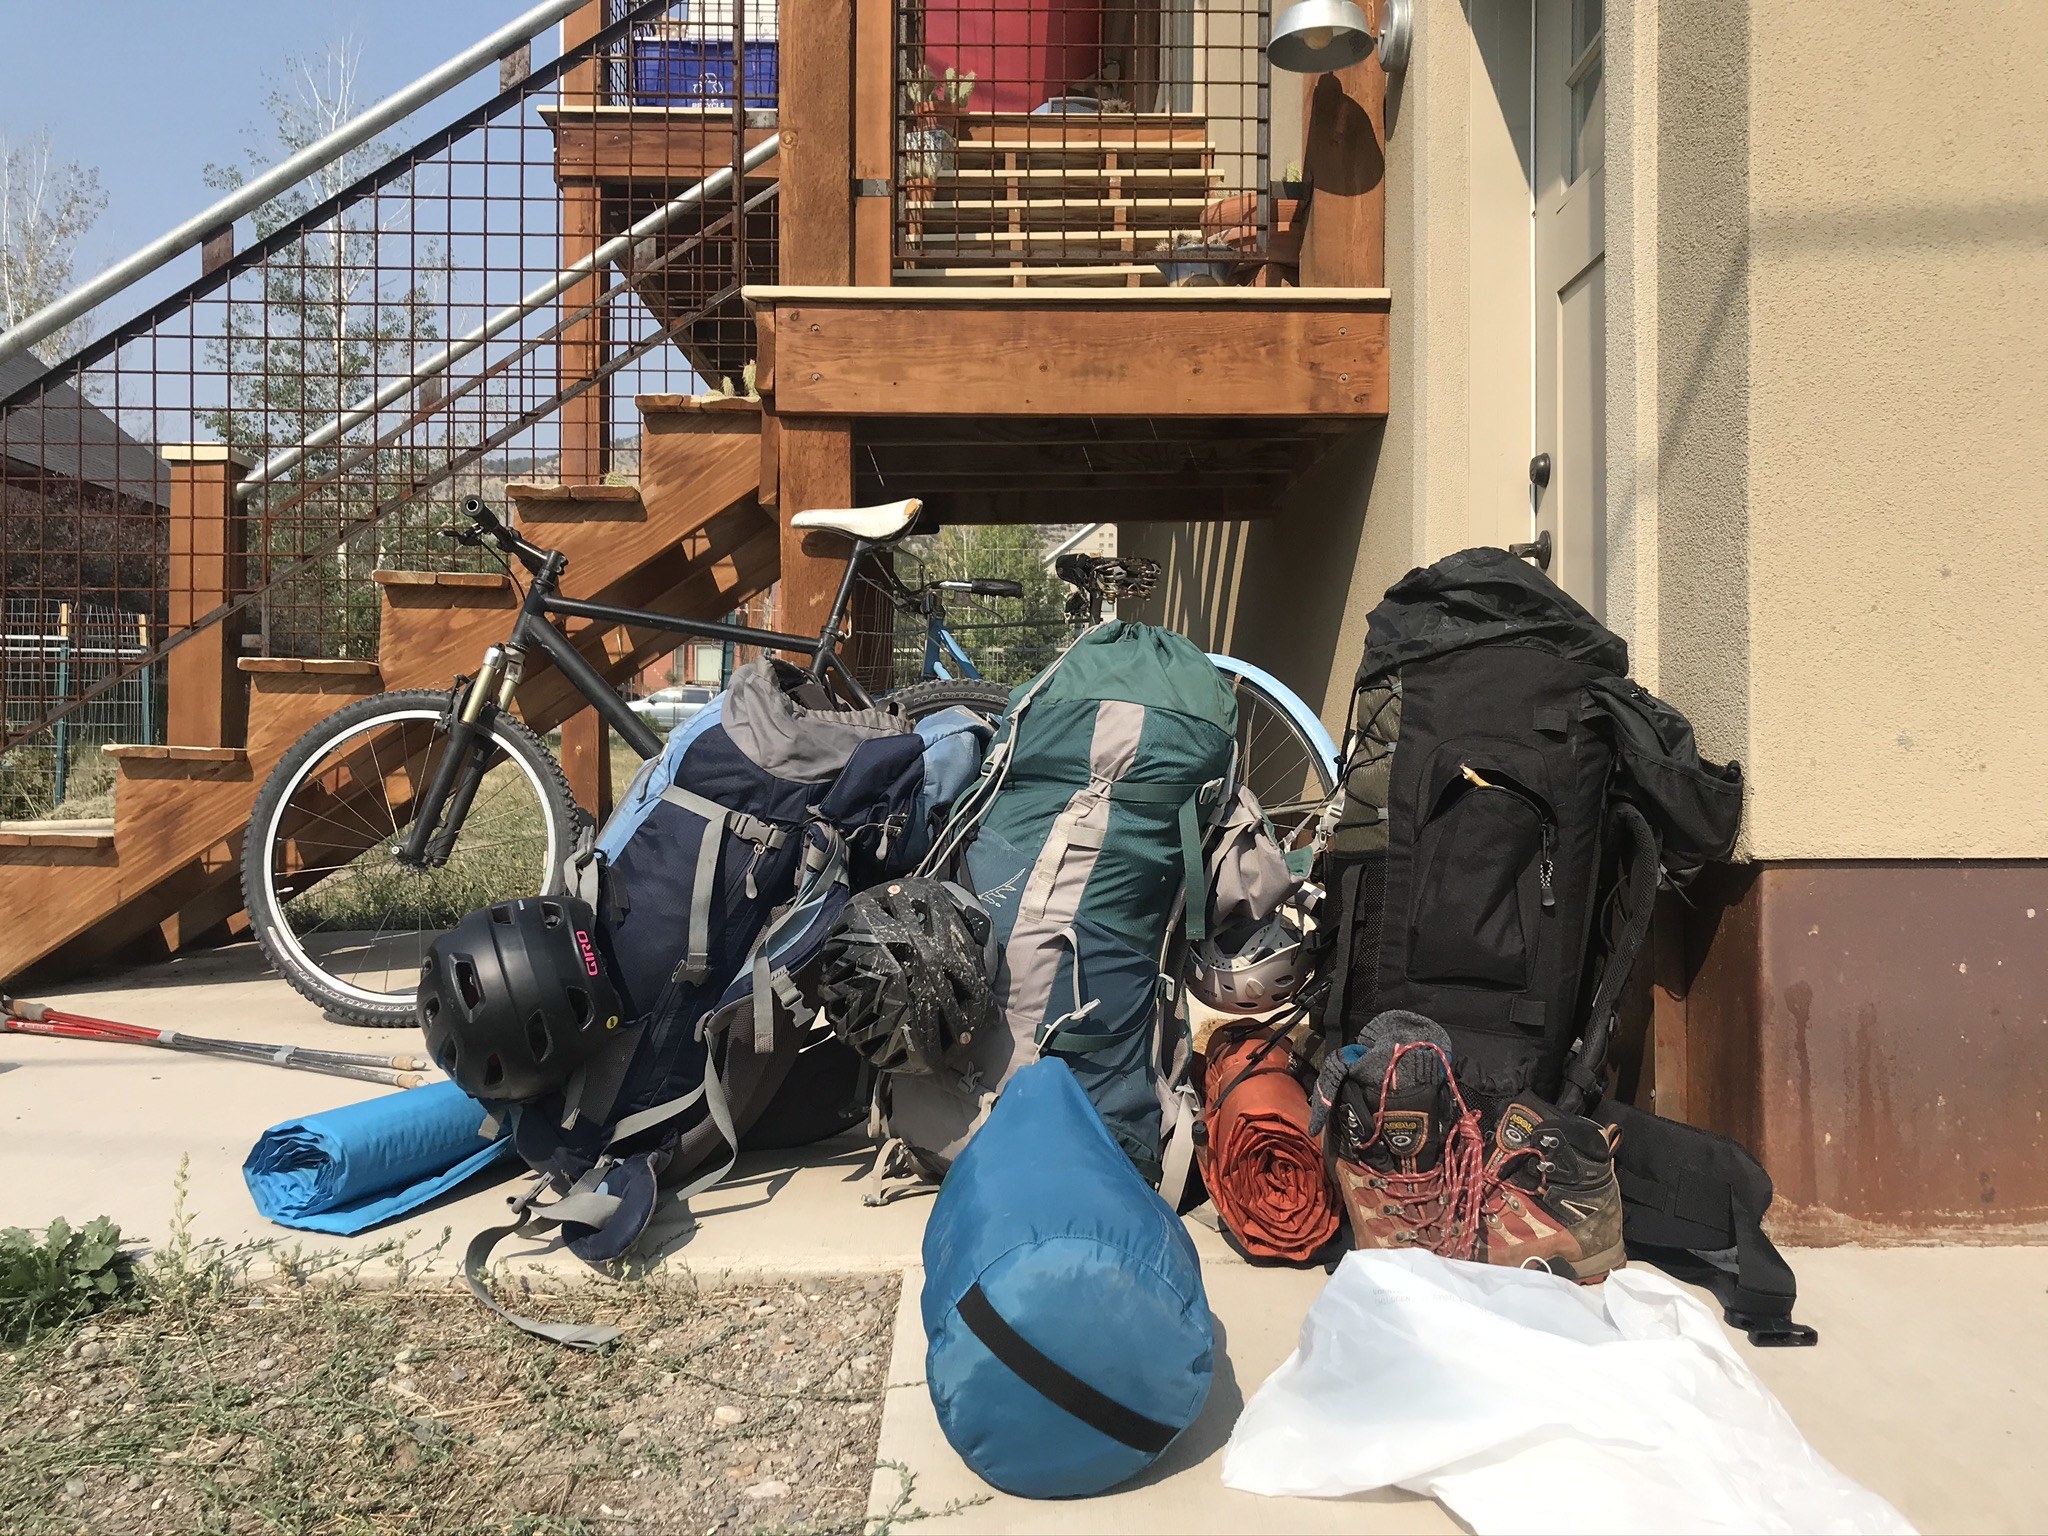 Backpacks and gear in a pile